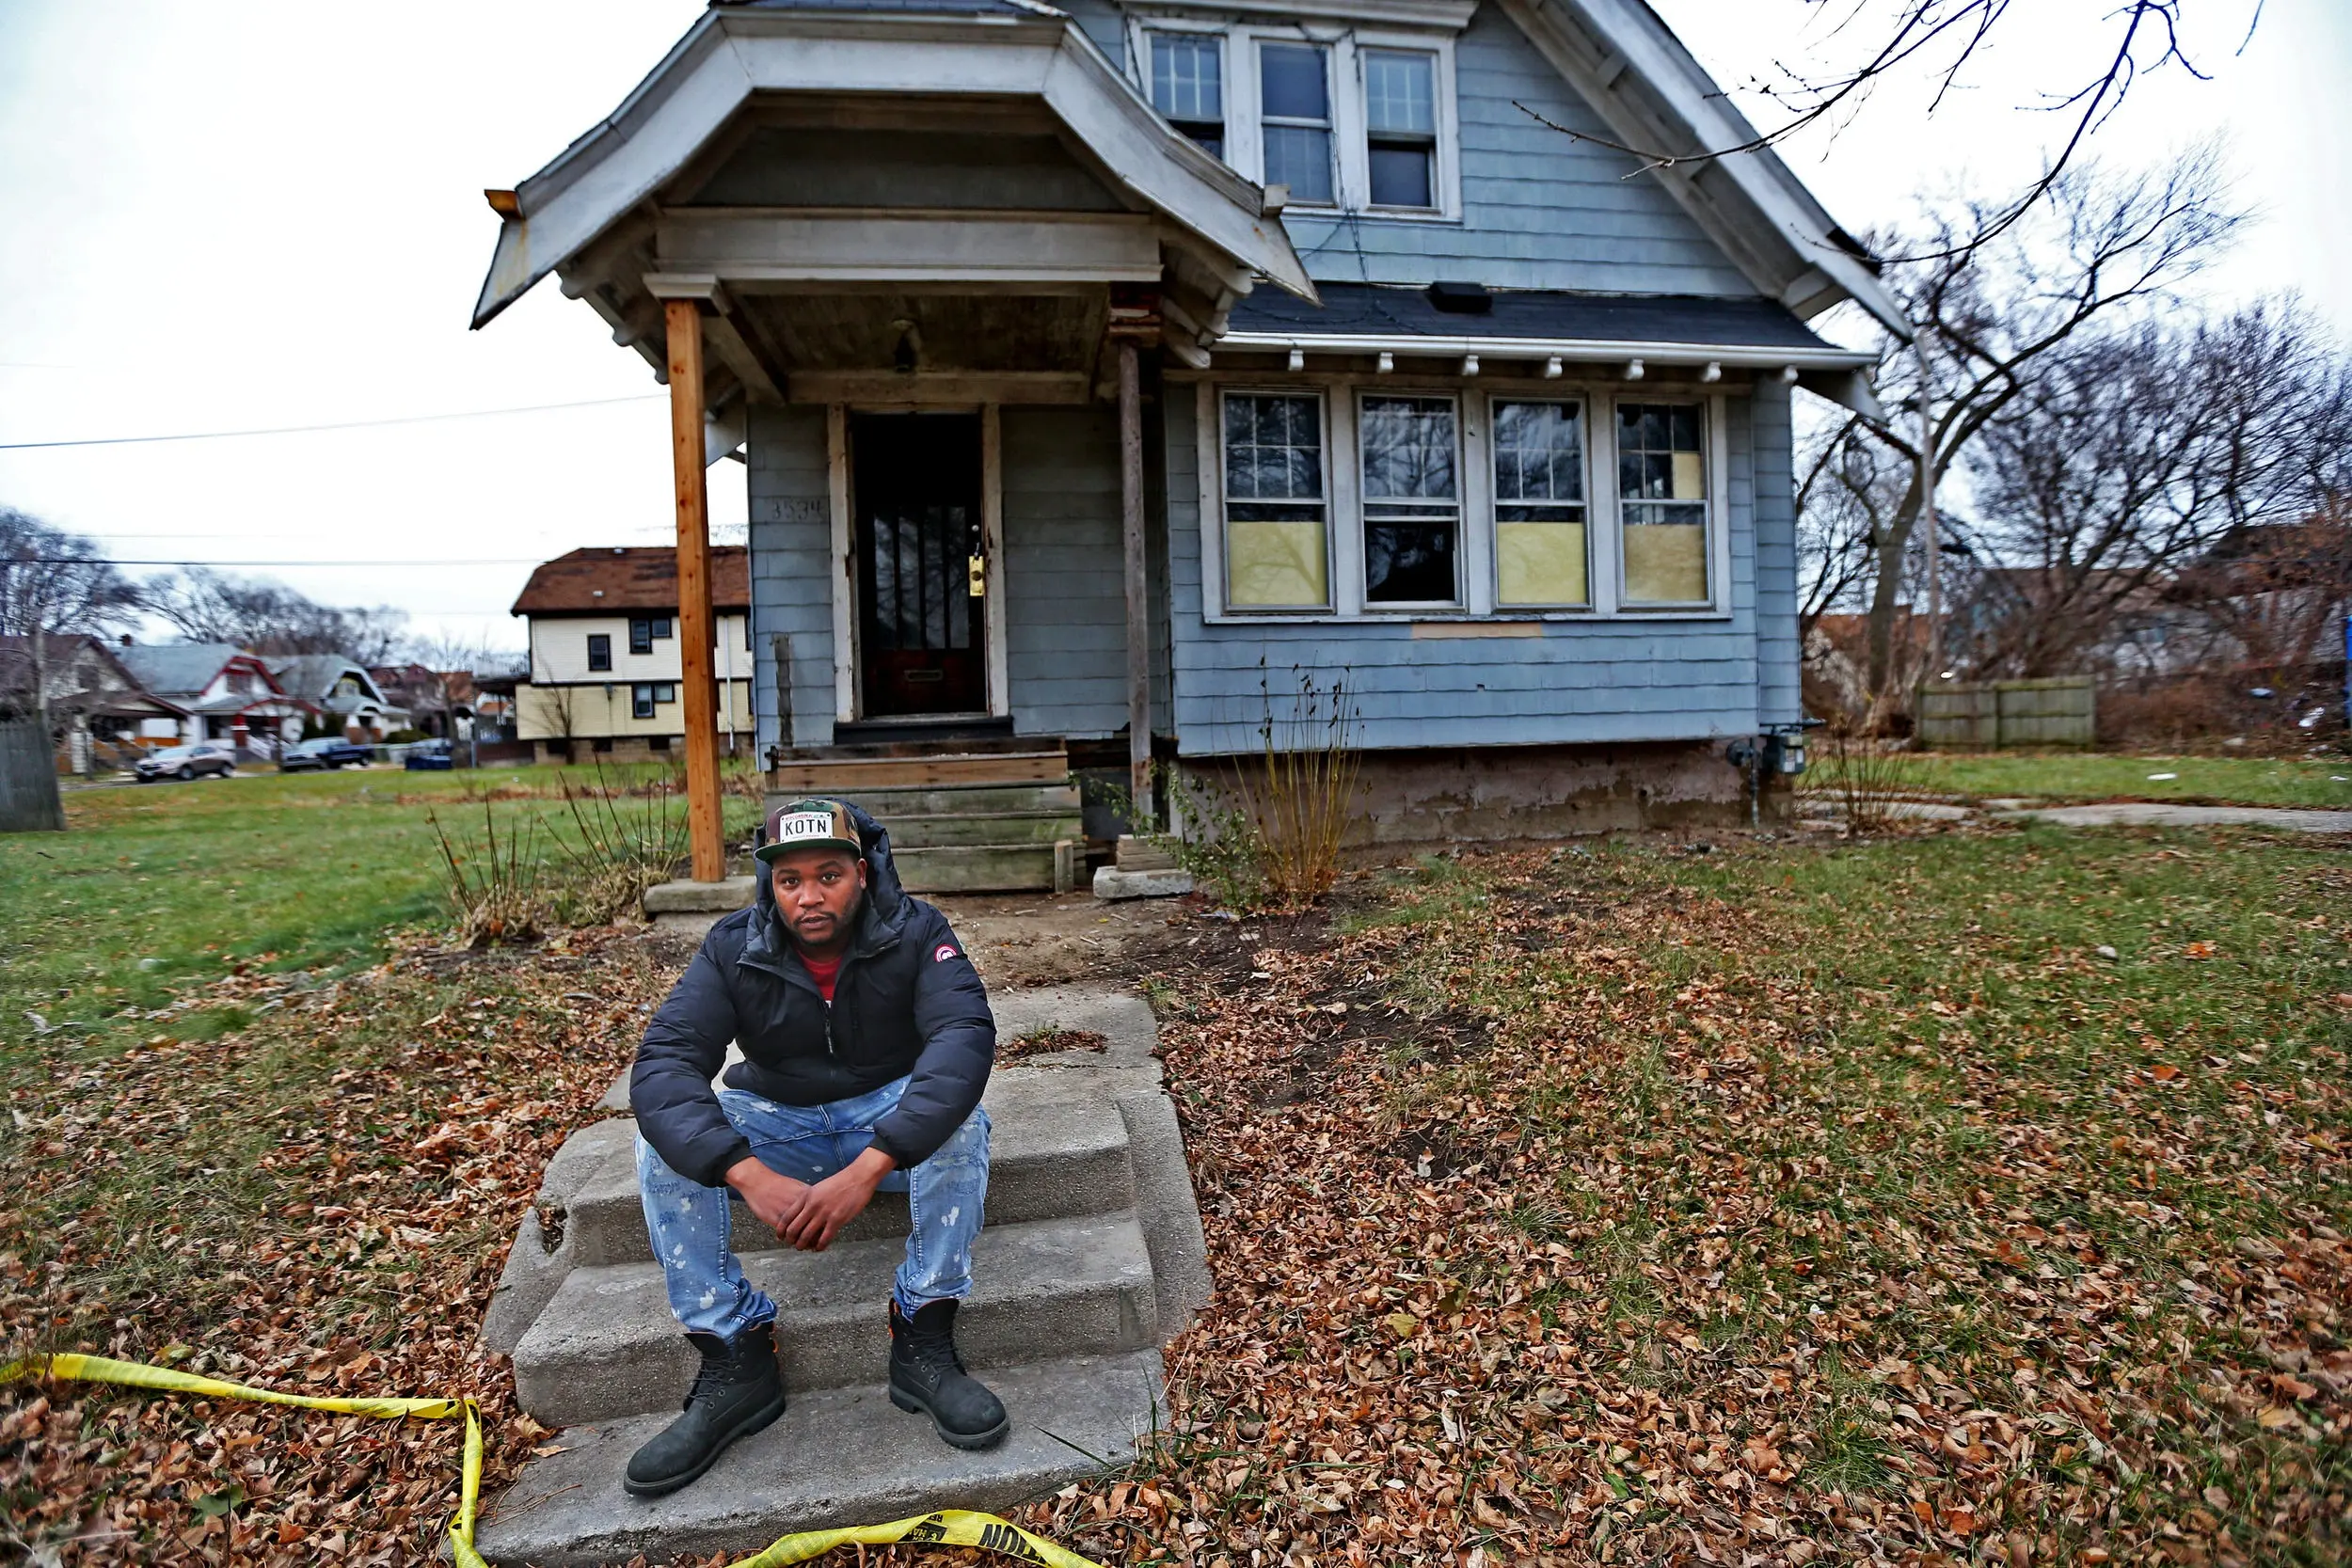 A man sits in front of a house